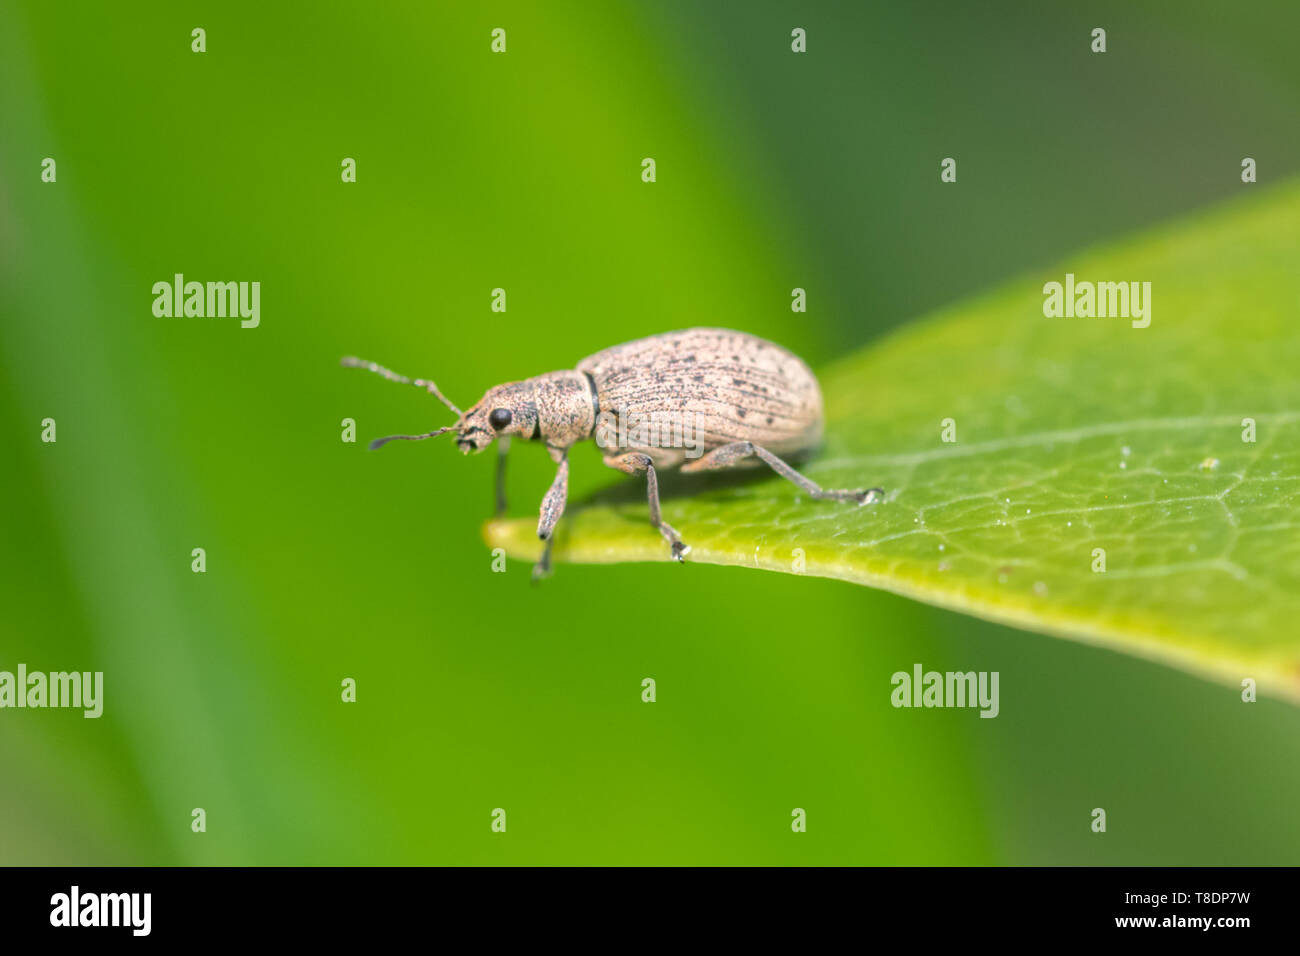 Weevil, a small insect, on rhododendron leaf, UK Stock Photo